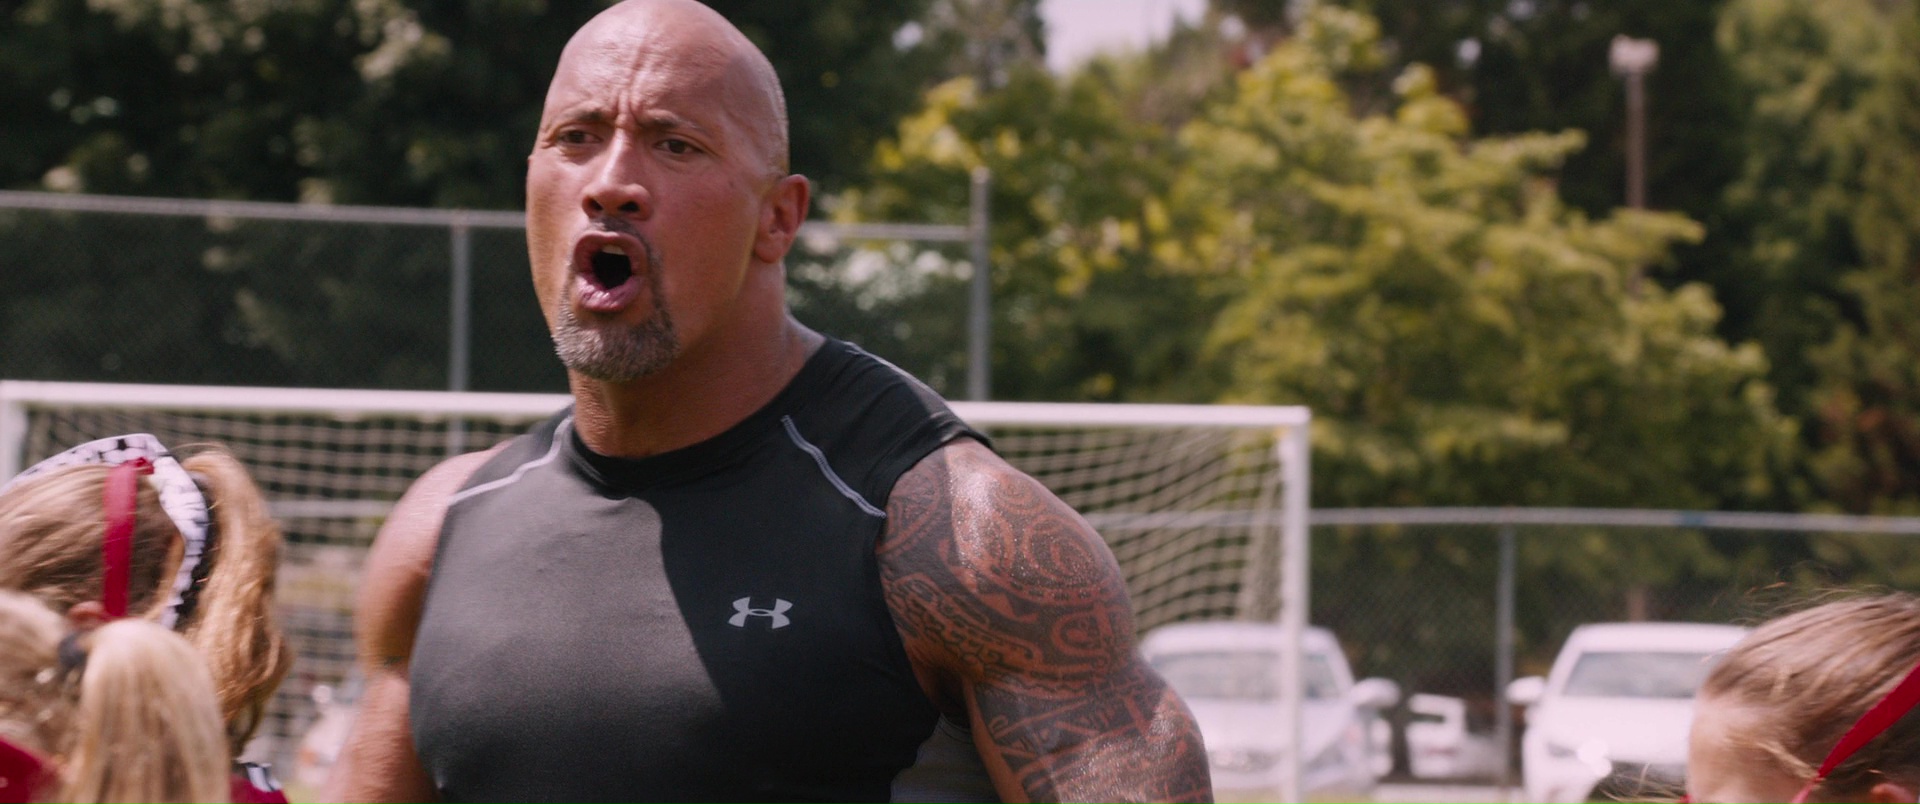 Gemidos congelado Papúa Nueva Guinea Under Armour Sleeveless T-Shirt Worn By Dwayne Johnson (The Rock) In The  Fate Of The Furious (2017)